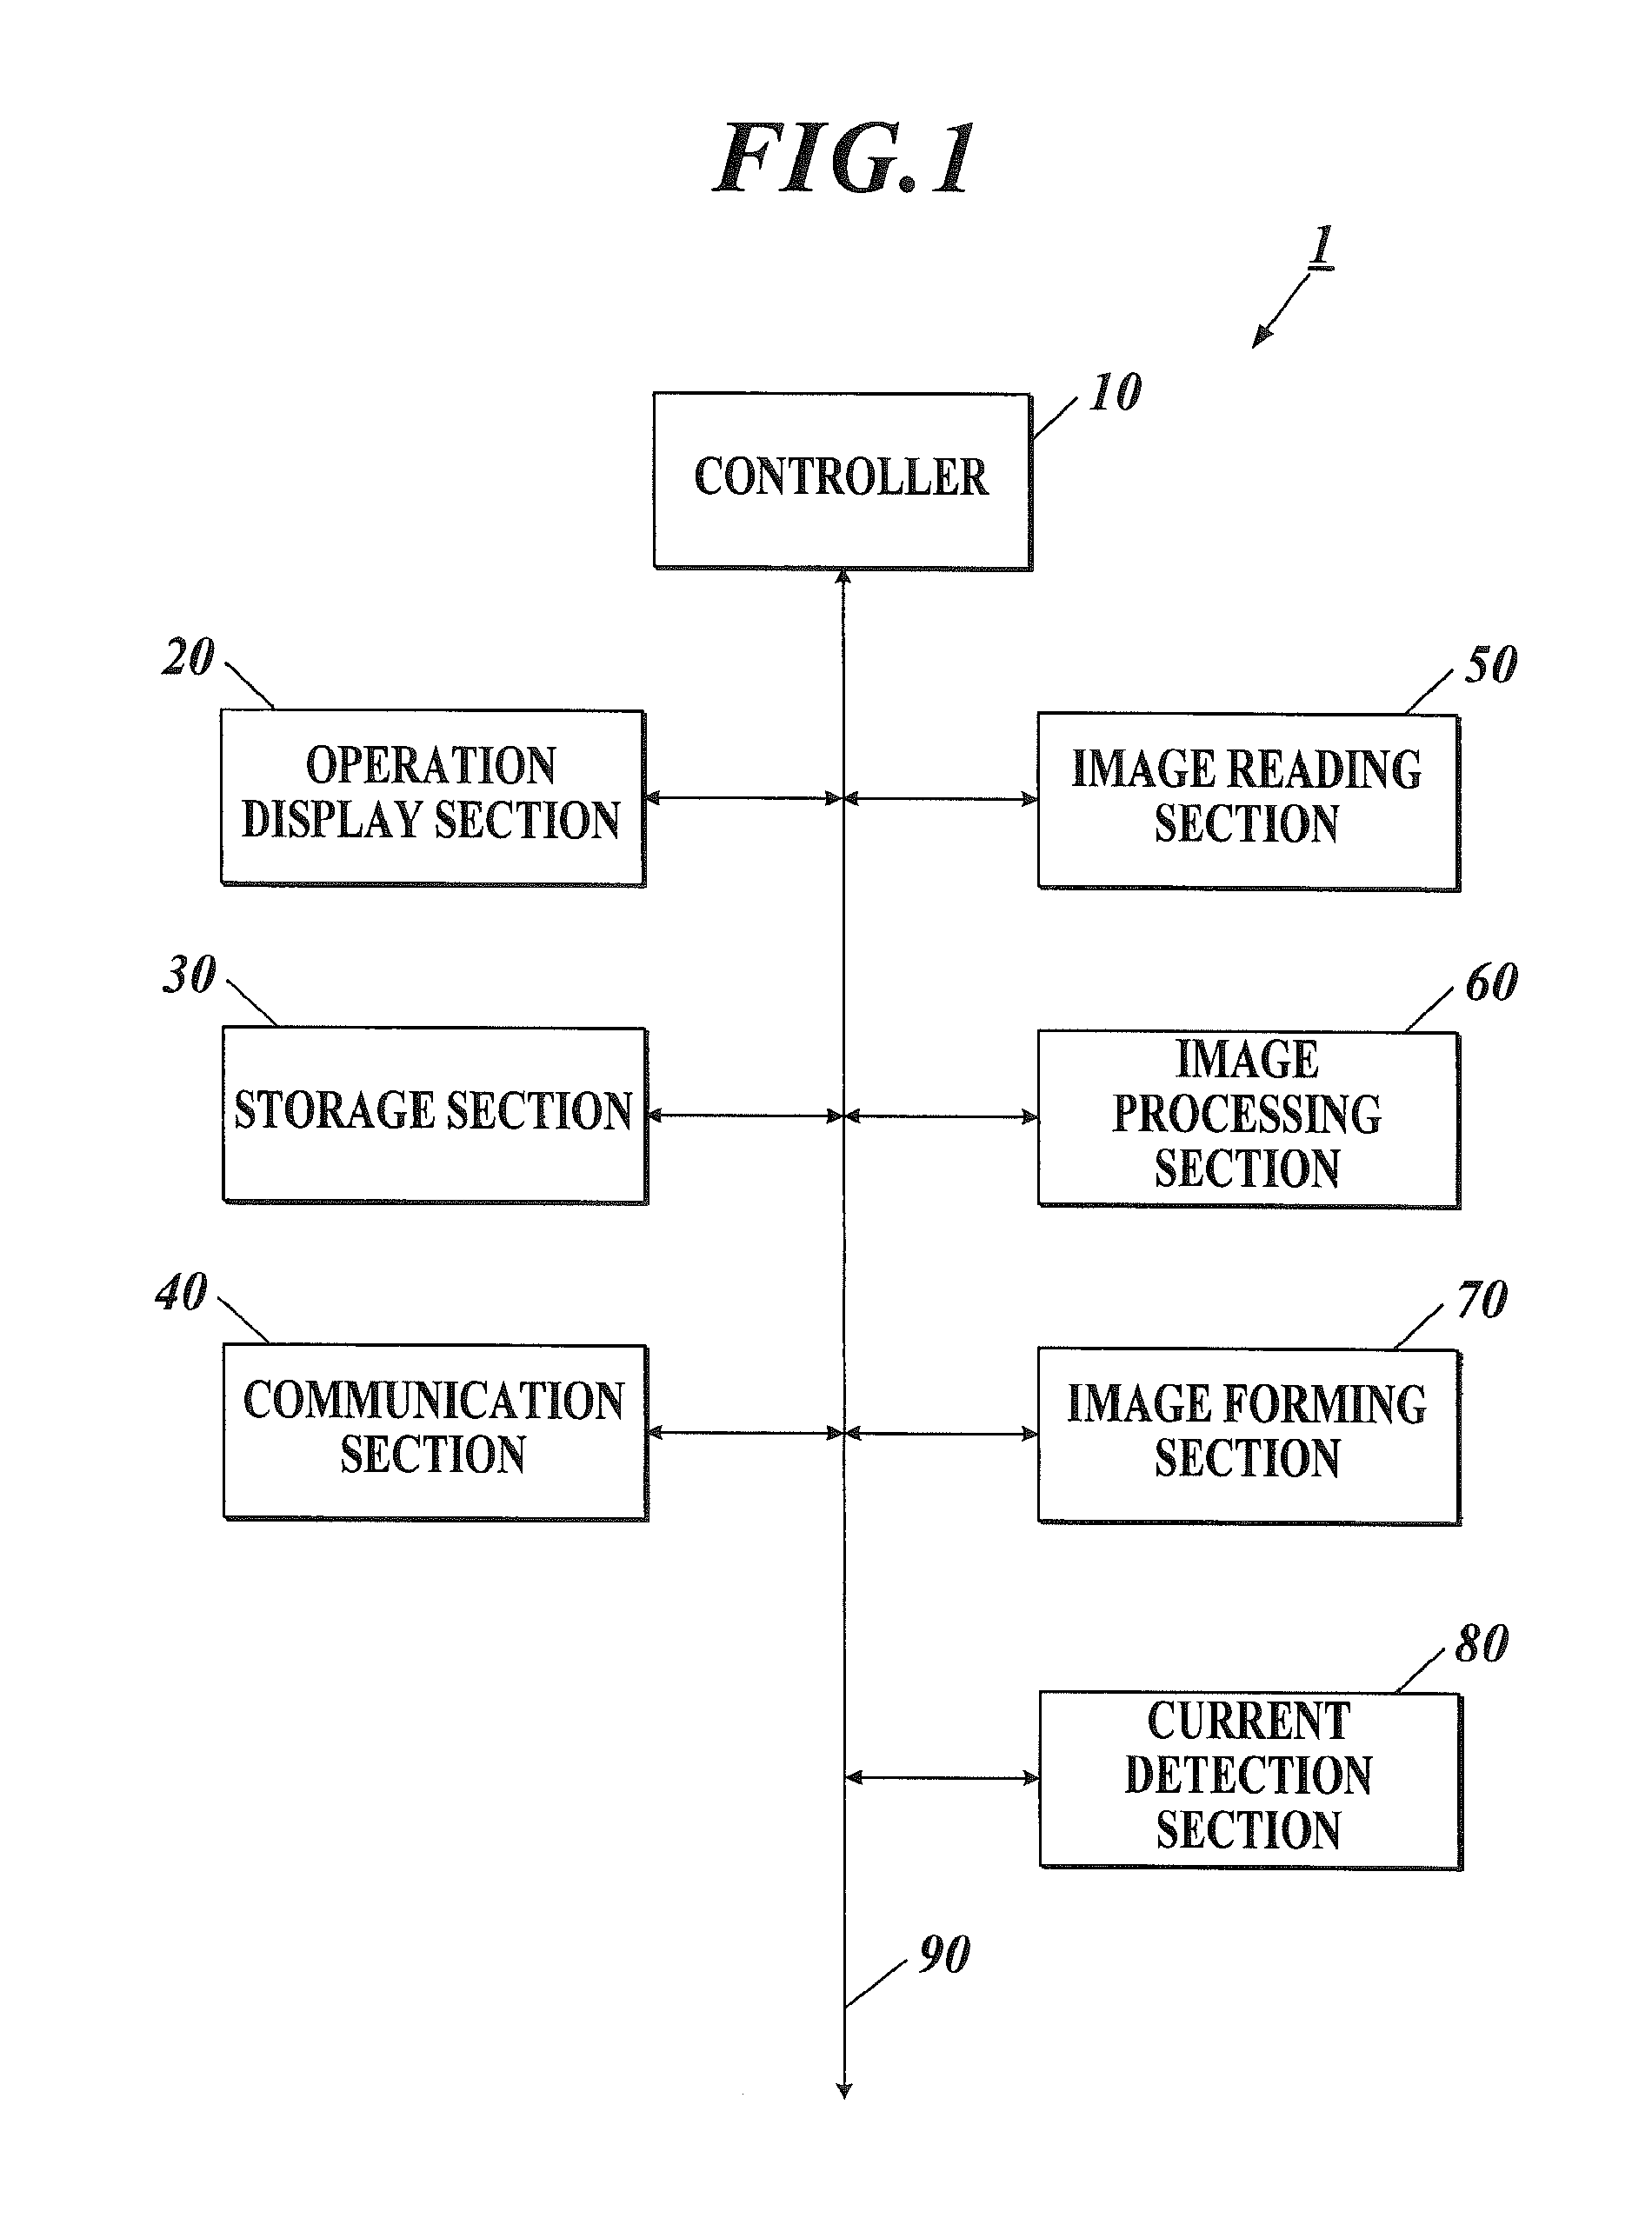 Image forming apparatus and method of controlling transfer current in the image forming apparatus